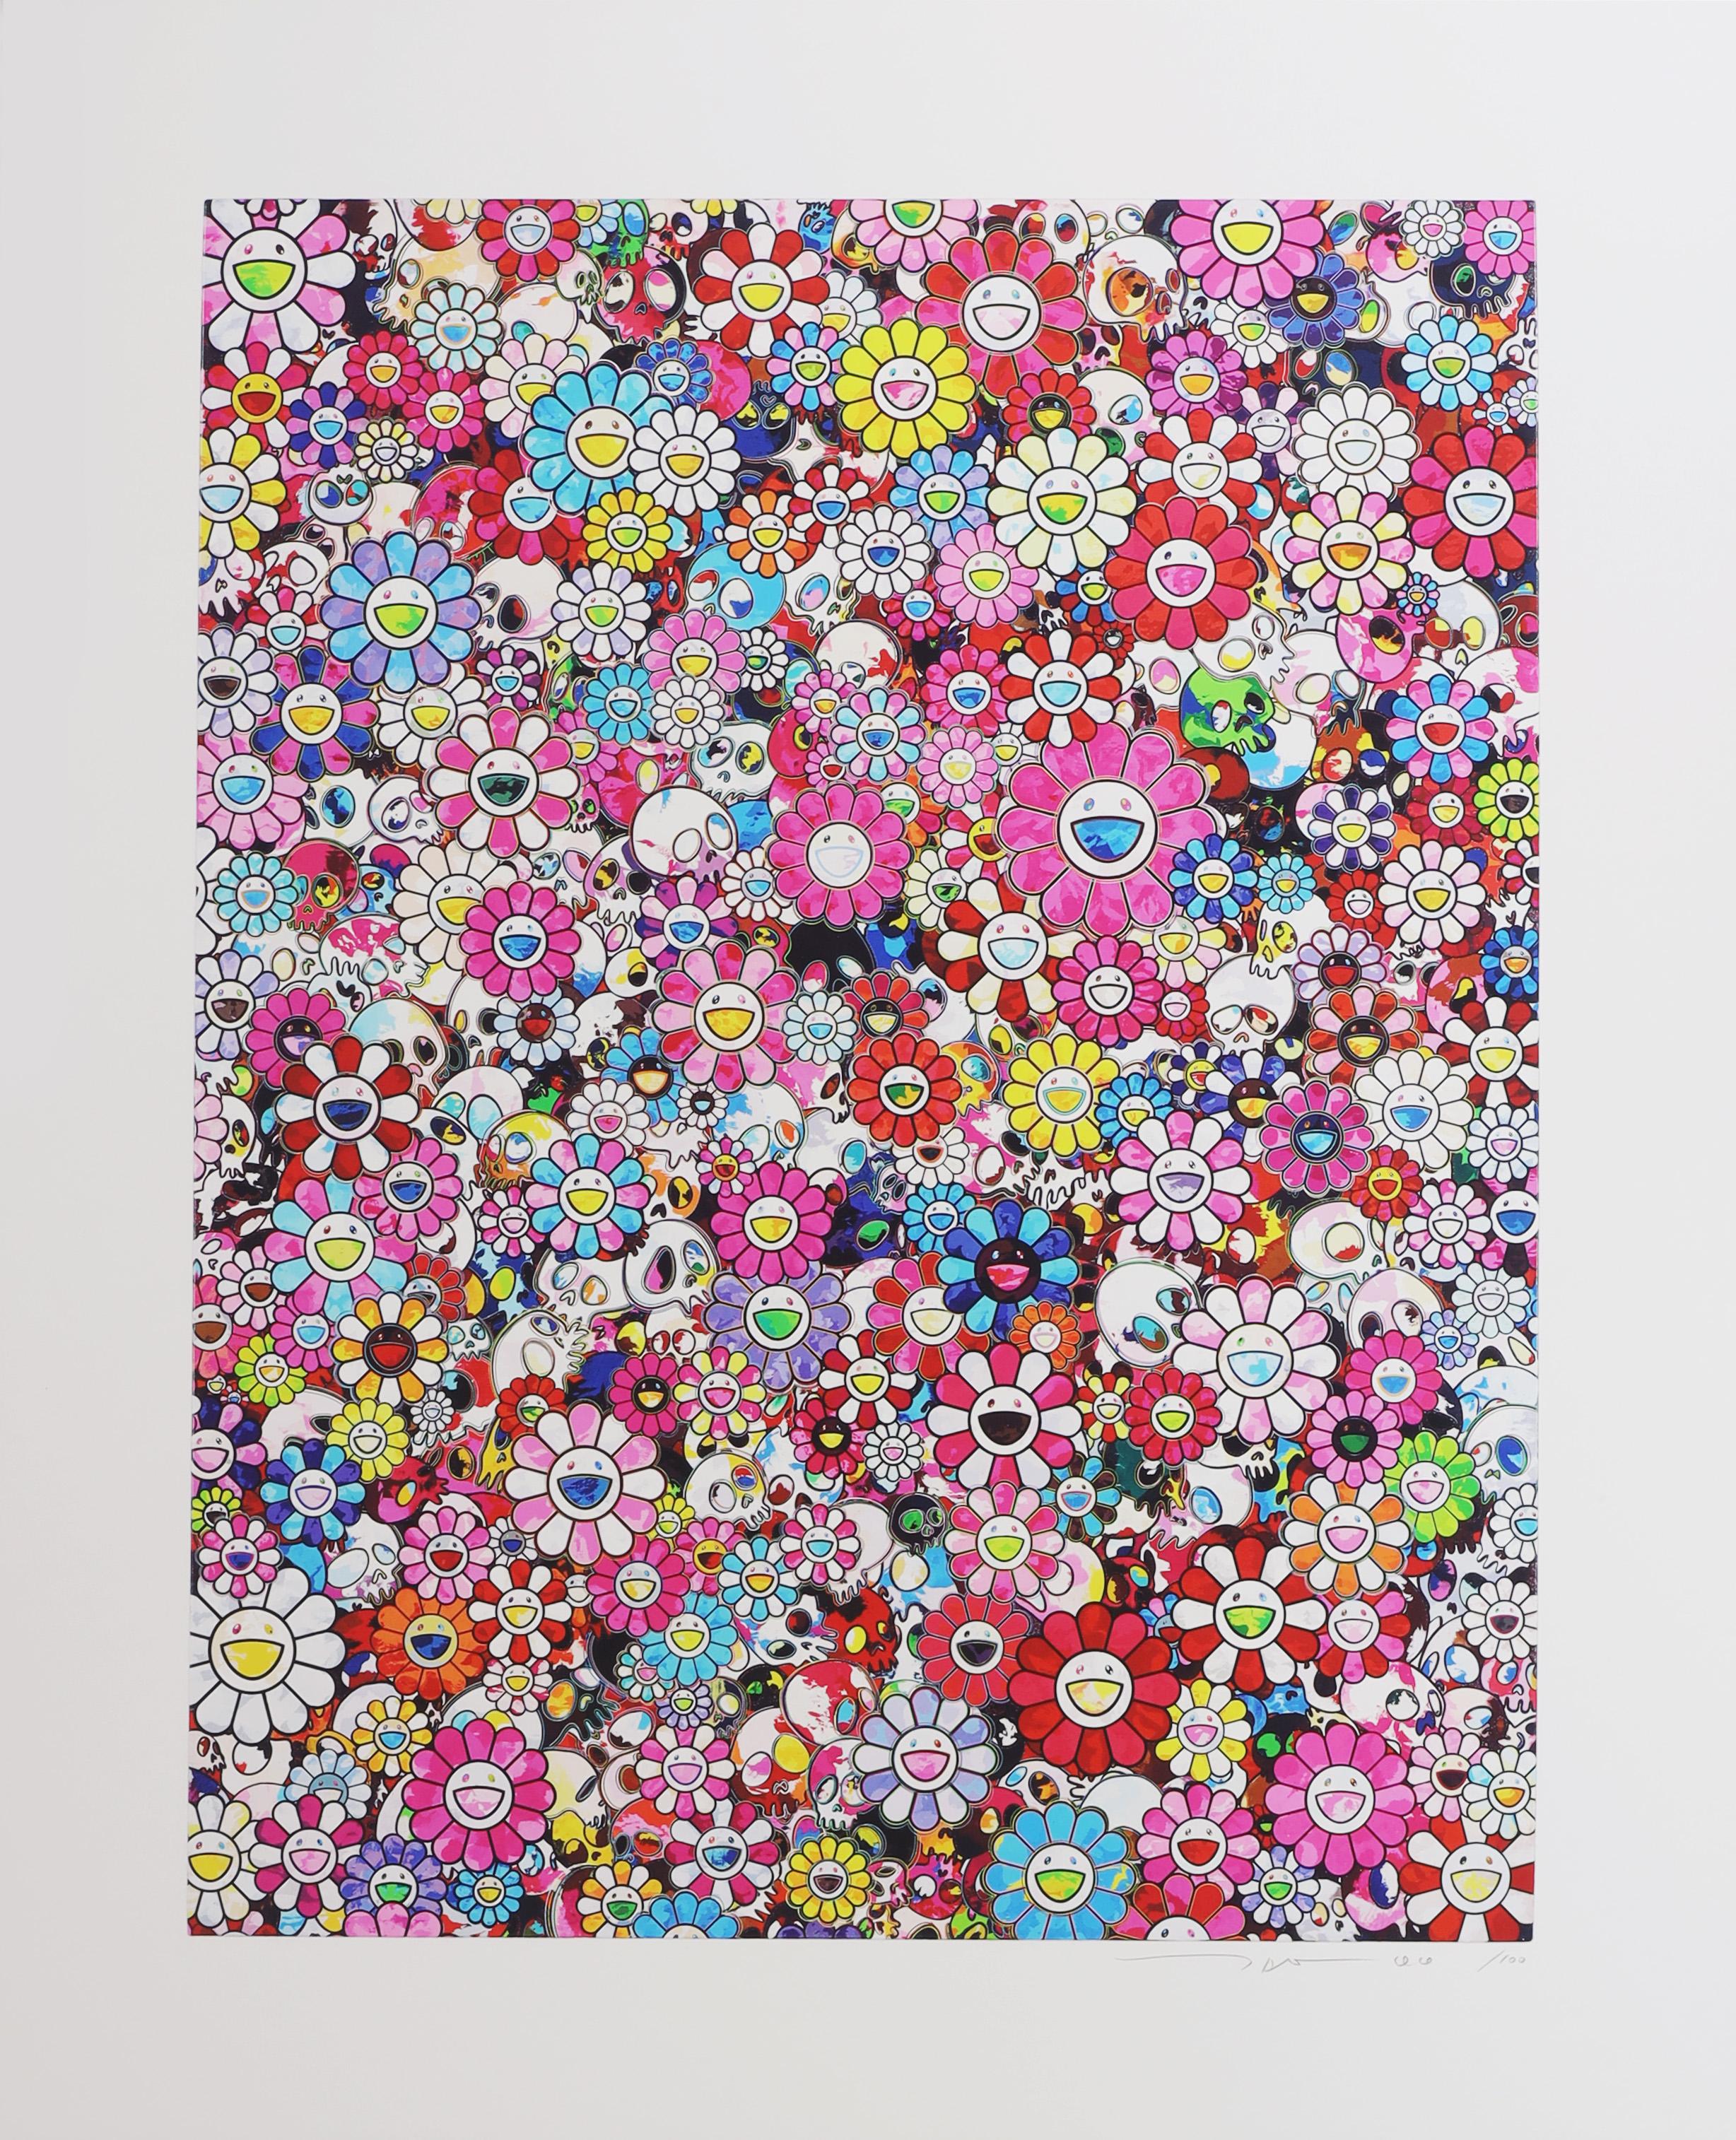 Dazzling Circus Embrace Peace and Darkness in Thy Heart - Print by Takashi Murakami